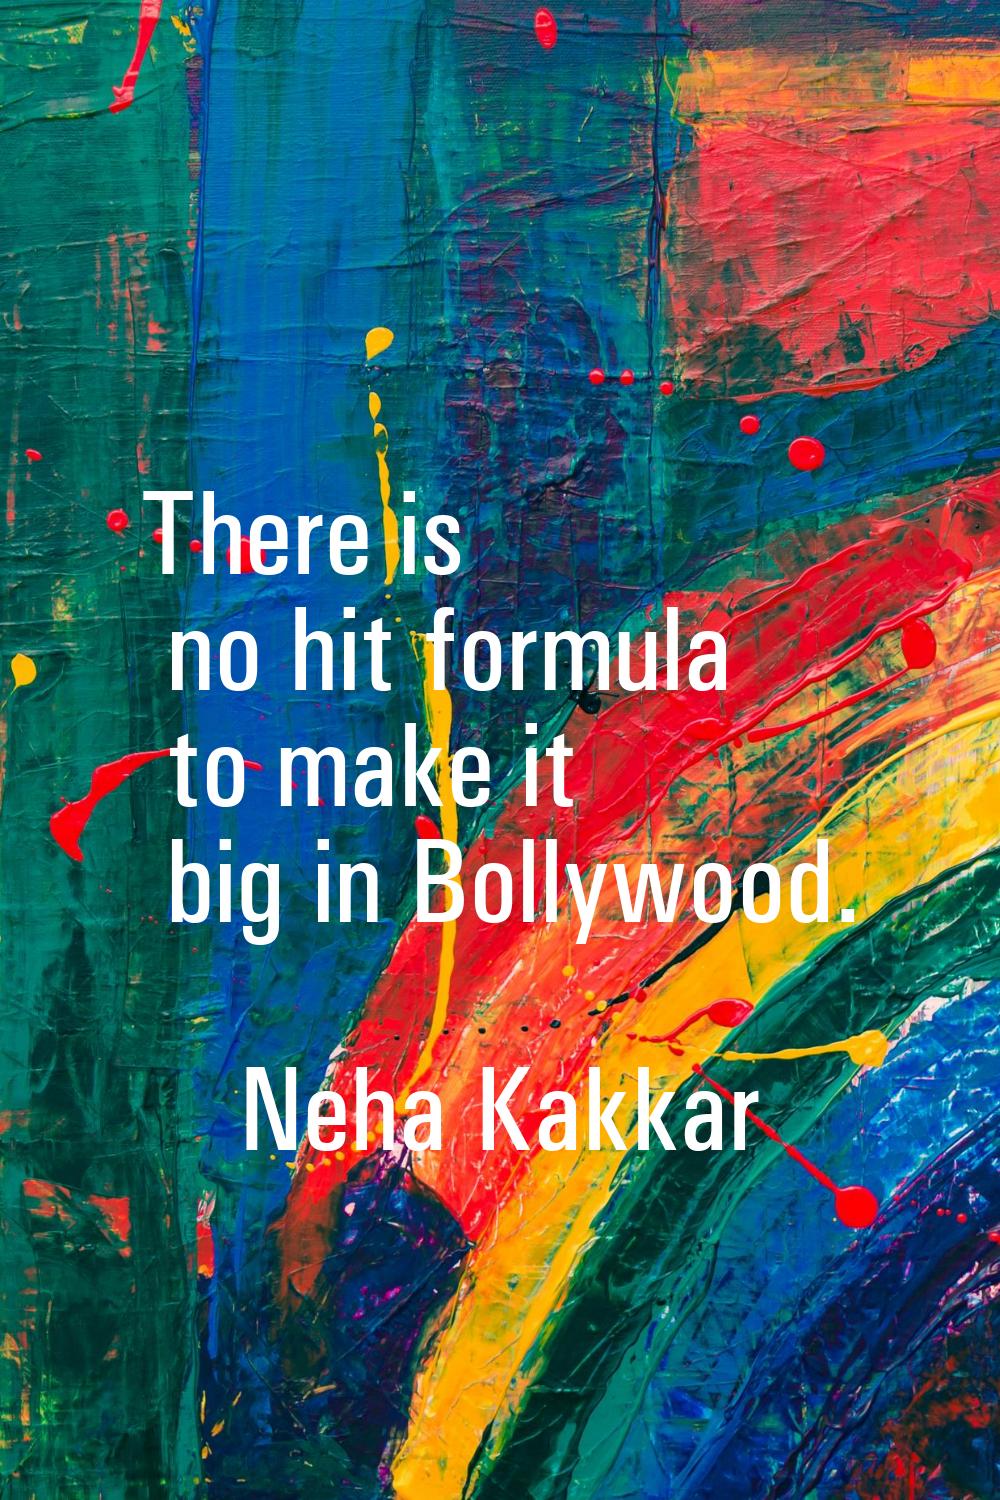 There is no hit formula to make it big in Bollywood.